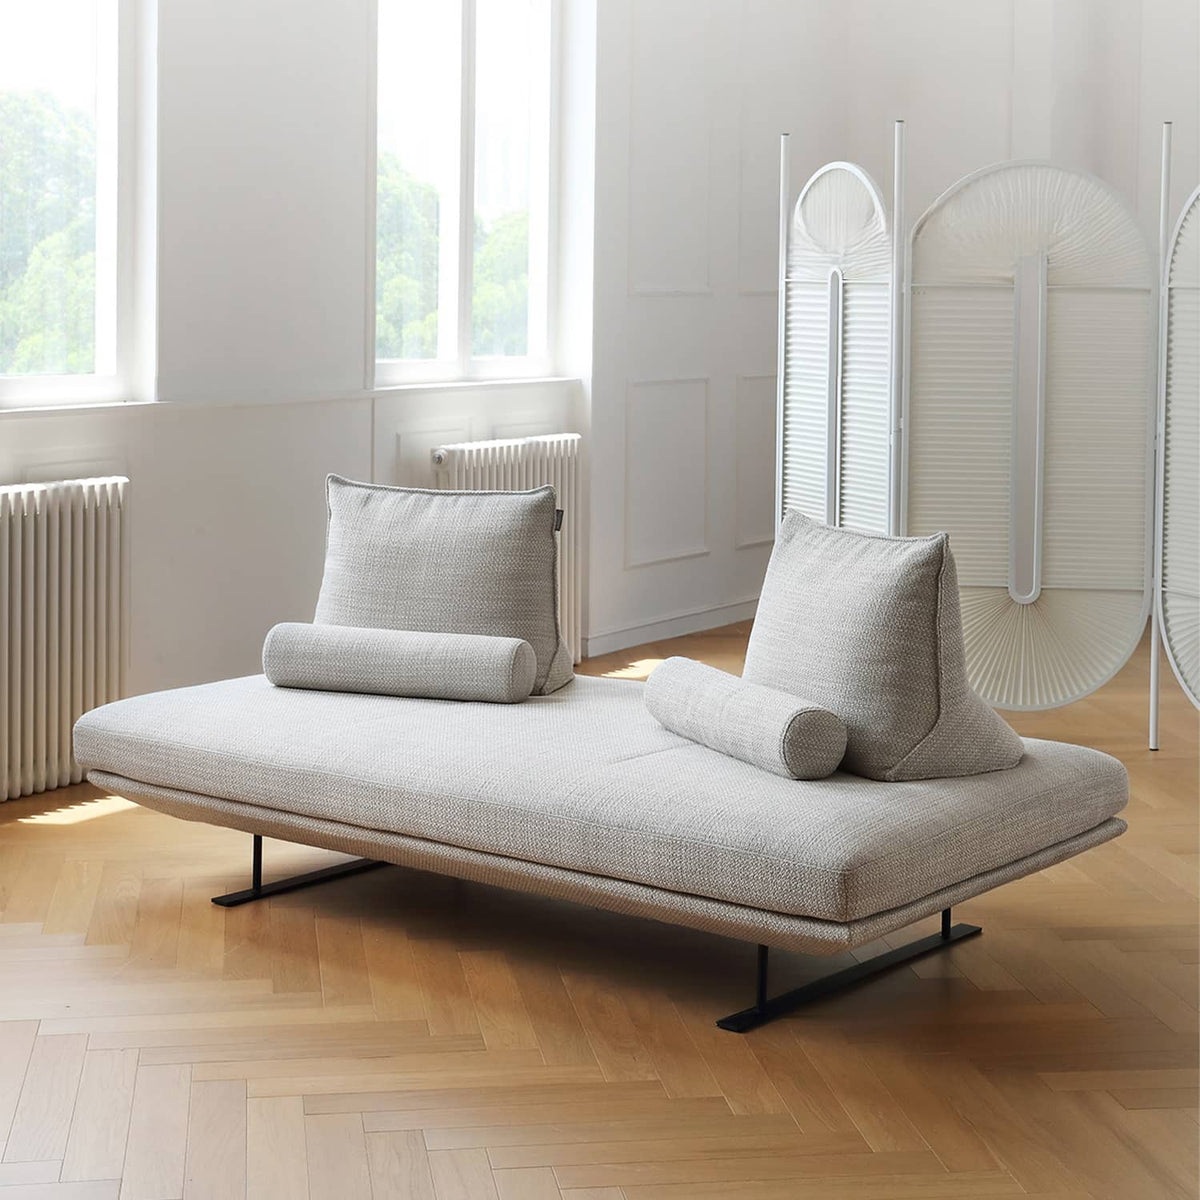 Contemporary Light Gray Sofa - Pine Wood Frame with Soft Cotton-Ramie Blend Upholstery my-364